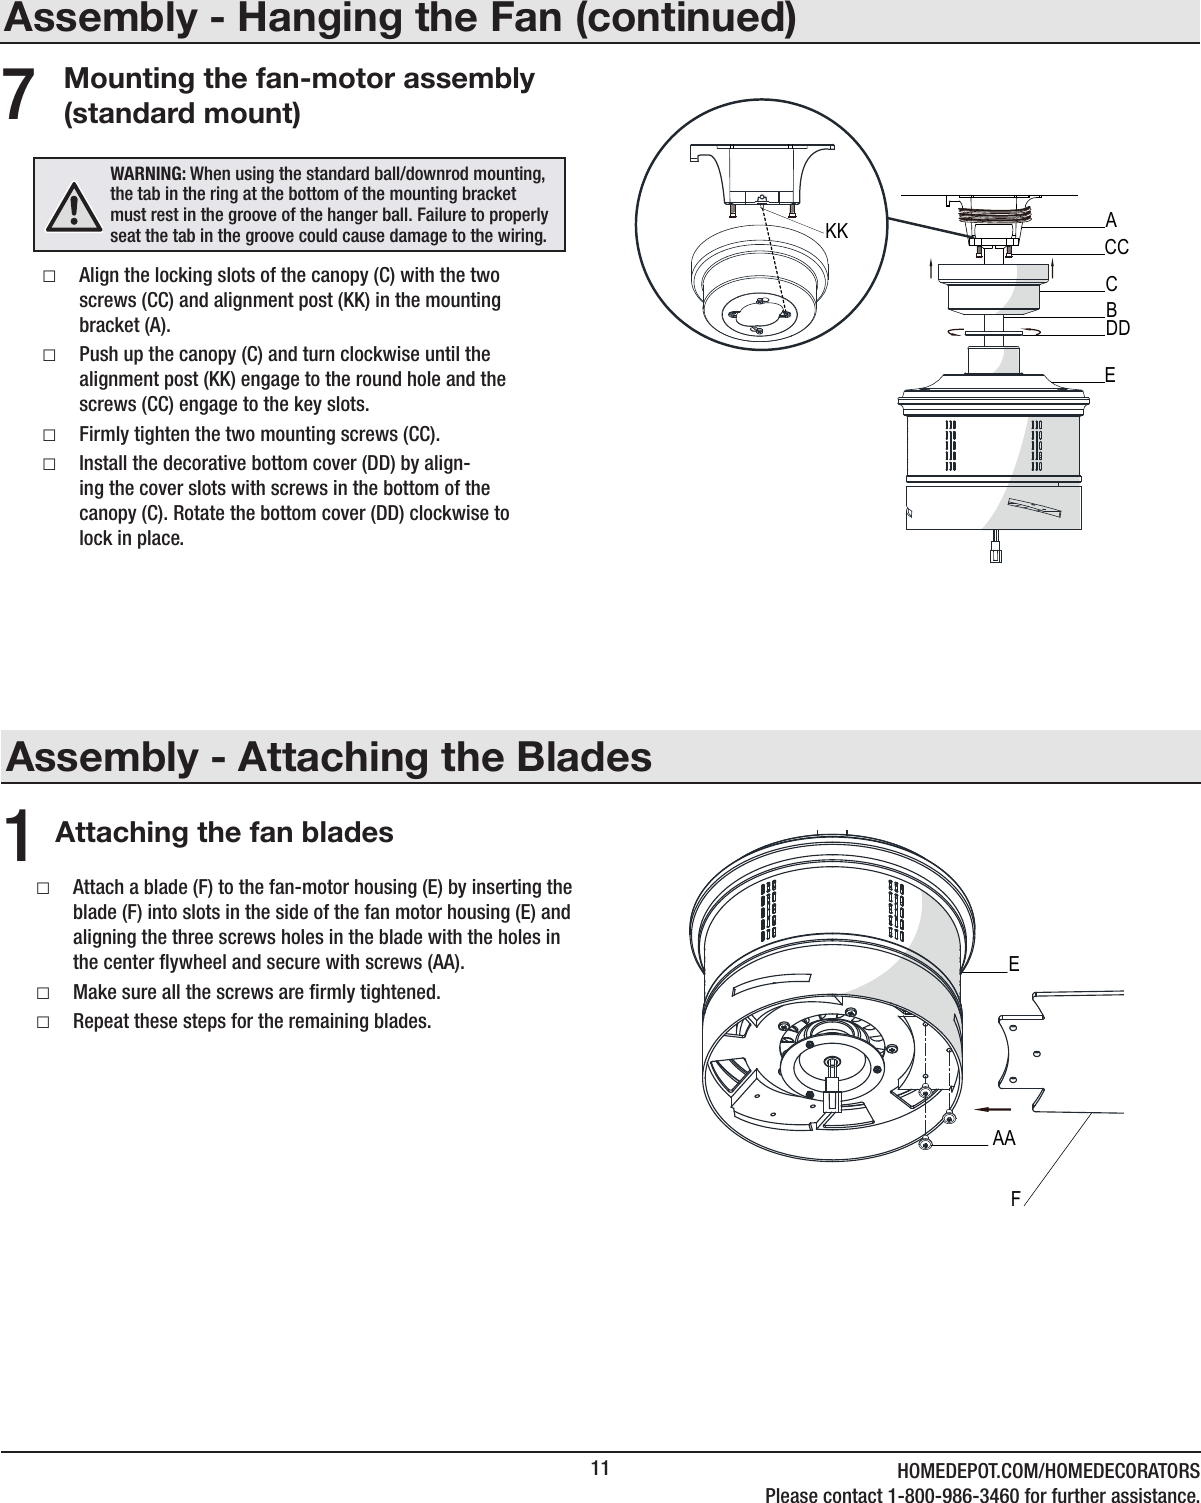 11 HOMEDEPOT.COM/HOMEDECORATORSPlease contact 1-800-986-3460 for further assistance.Assembly - Attaching the BladesAttaching the fan blades1 □Attach a blade (F) to the fan-motor housing (E) by inserting the blade (F) into slots in the side of the fan motor housing (E) and aligning the three screws holes in the blade with the holes in the center ywheel and secure with screws (AA). □Make sure all the screws are rmly tightened. □Repeat these steps for the remaining blades.Assembly - Hanging the Fan (continued)Mounting the fan-motor assembly (standard mount) □Align the locking slots of the canopy (C) with the two screws (CC) and alignment post (KK) in the mounting bracket (A). □Push up the canopy (C) and turn clockwise until the alignment post (KK) engage to the round hole and the screws (CC) engage to the key slots. □Firmly tighten the two mounting screws (CC). □Install the decorative bottom cover (DD) by align-ing the cover slots with screws in the bottom of the canopy (C). Rotate the bottom cover (DD) clockwise to lock in place.7WARNING: When using the standard ball/downrod mounting, the tab in the ring at the bottom of the mounting bracket must rest in the groove of the hanger ball. Failure to properly seat the tab in the groove could cause damage to the wiring.CACCDDBEKKEAAF